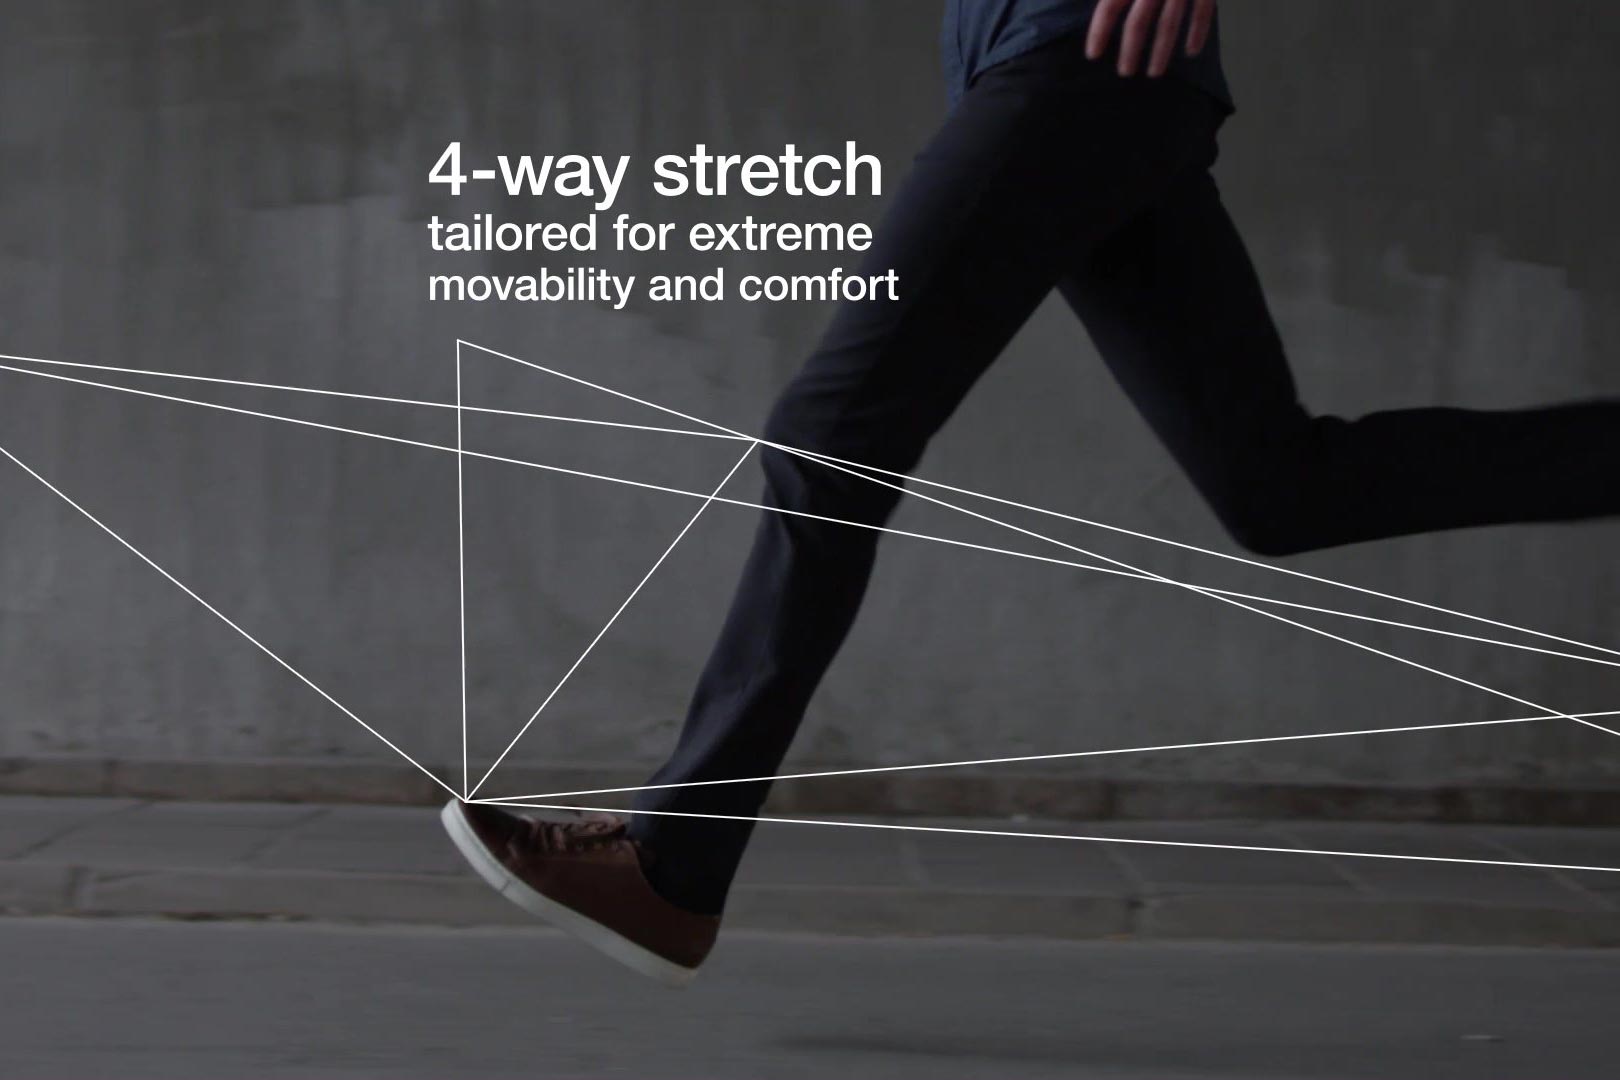 An image showing the 4-way strech feature.